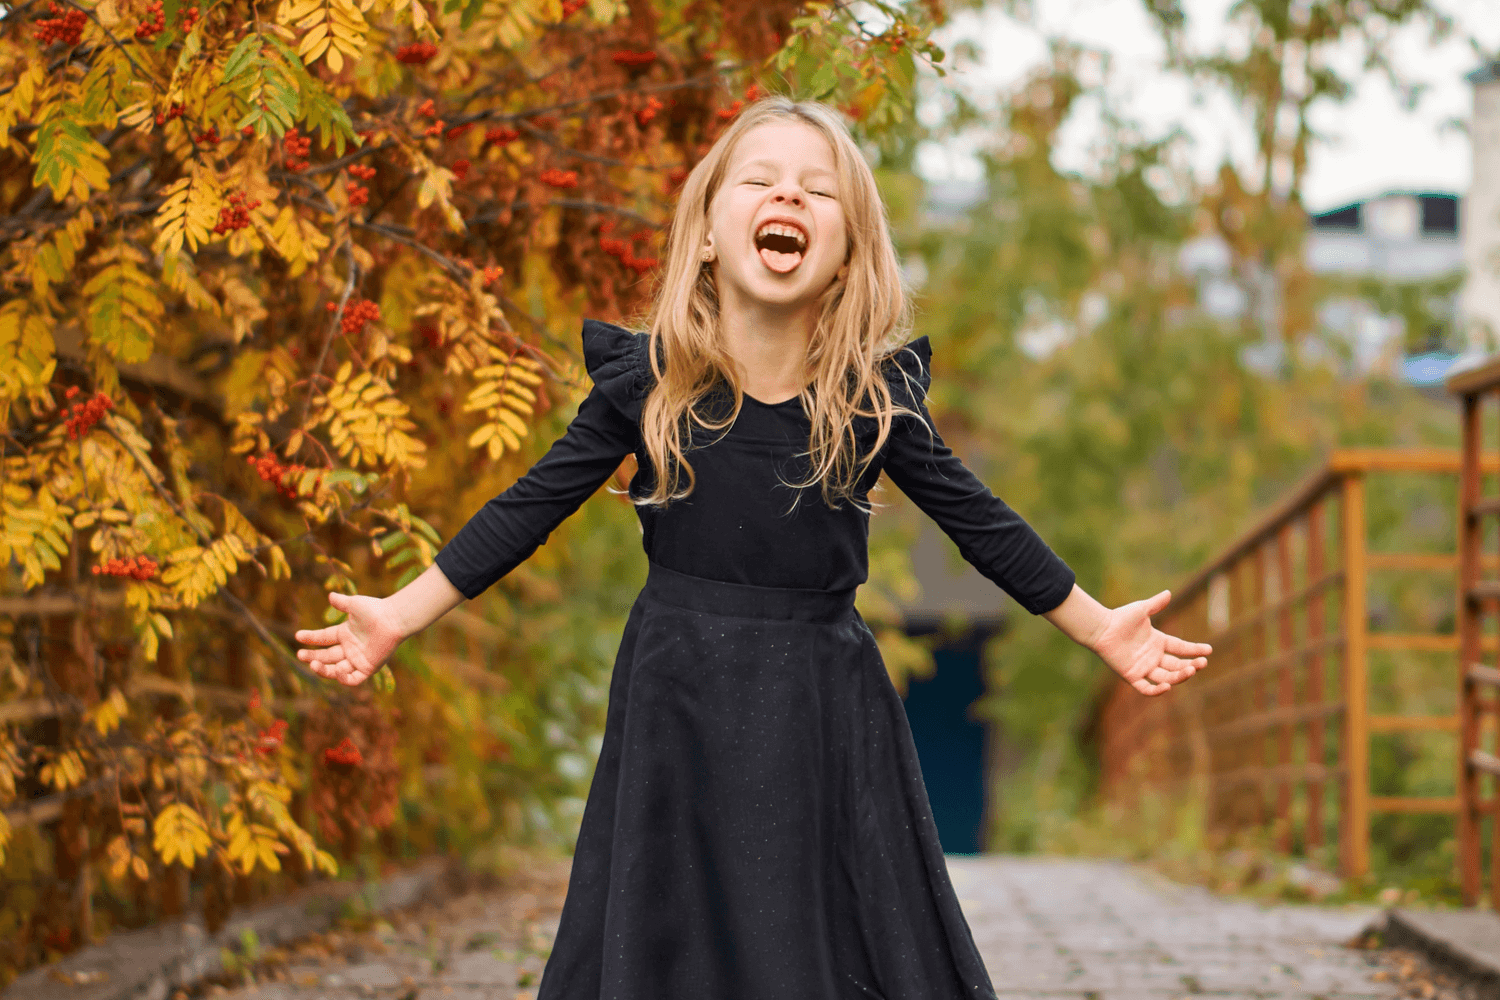 A little girl dressed up as a witch laughing